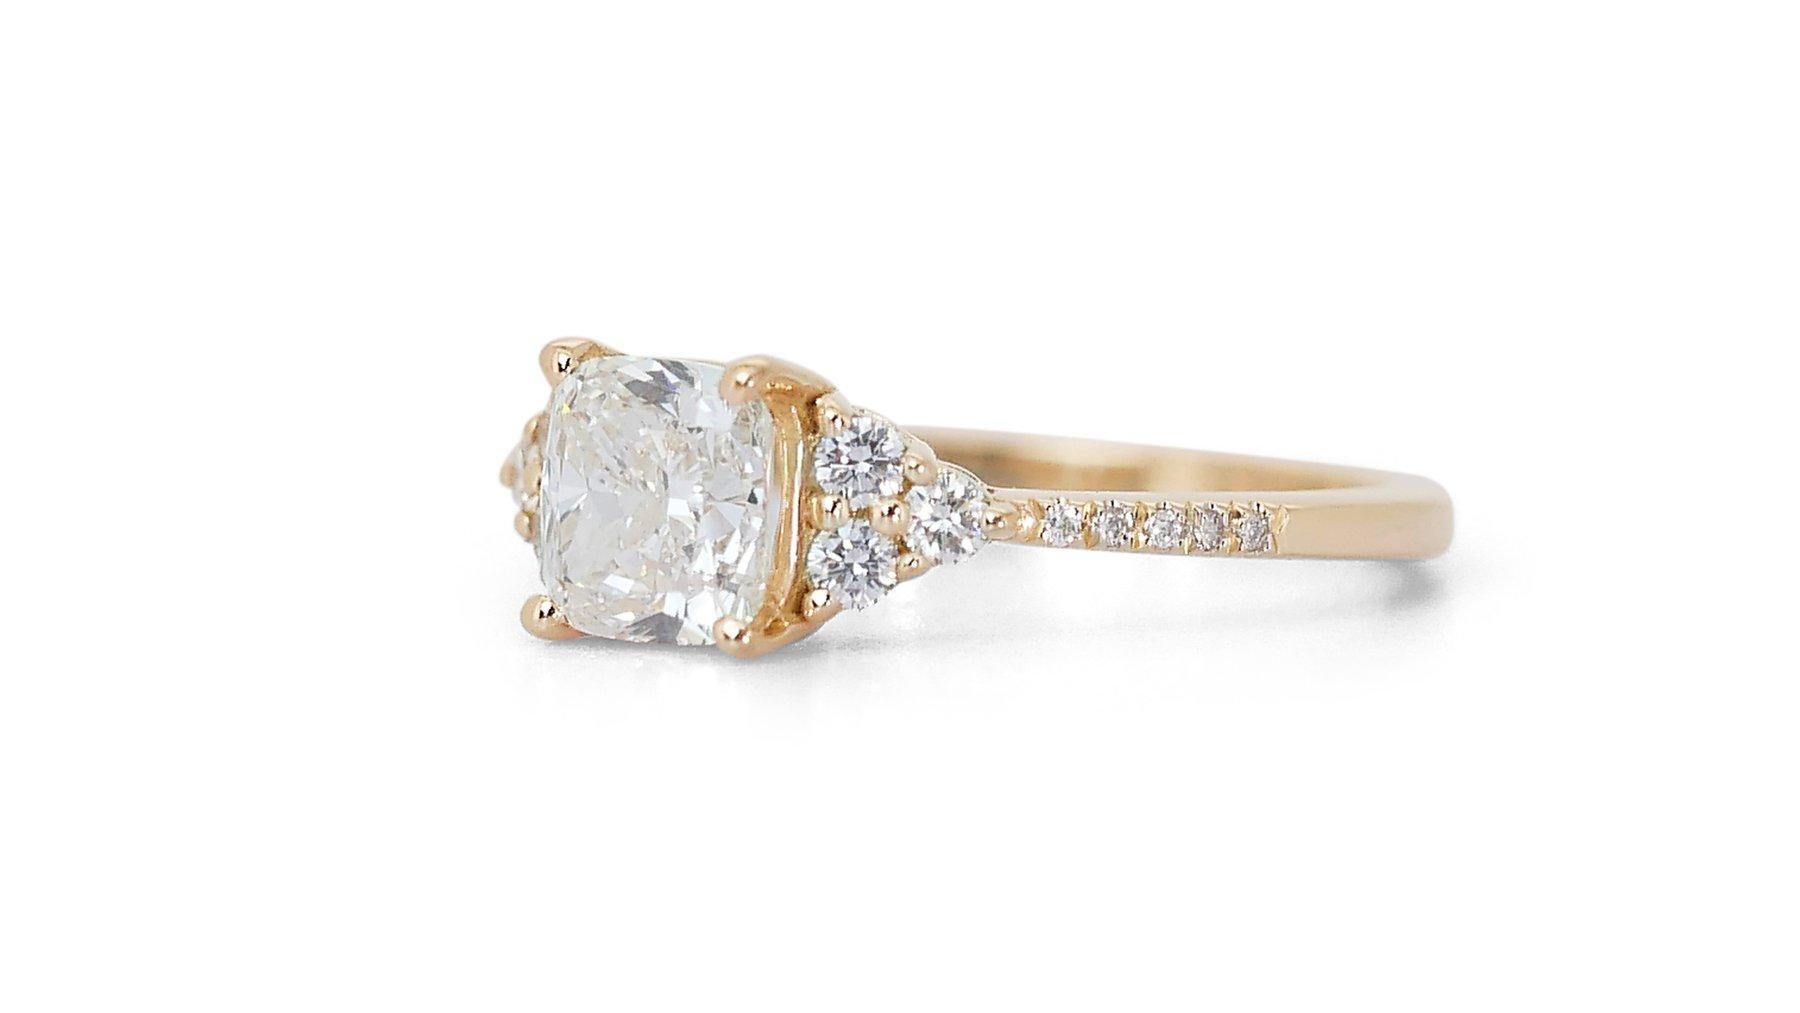 Luminous 1.98ct Diamonds Pave Ring in 18k Yellow Gold - GIA Certified

Step into the world of timeless luxury with this magnificent 18k yellow gold pave ring, featuring an impressive 1.76-carat cushion-cut main diamond. The design is further